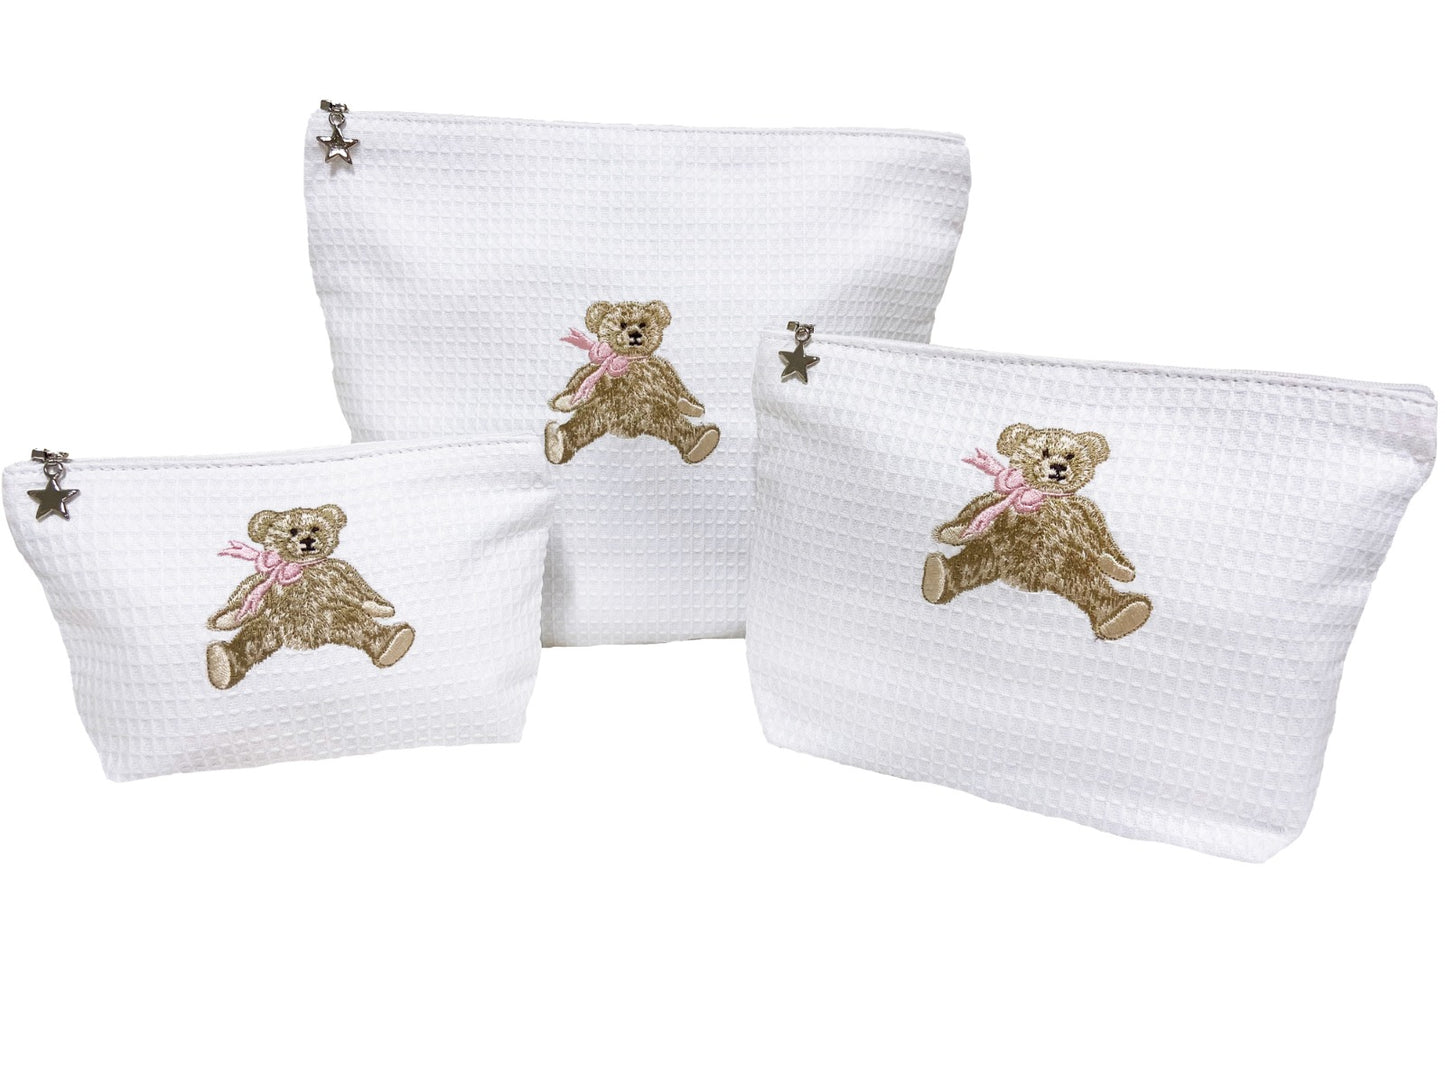 Cosmetic Bag (Small), Waffle Weave, Bow Teddy (Pink)